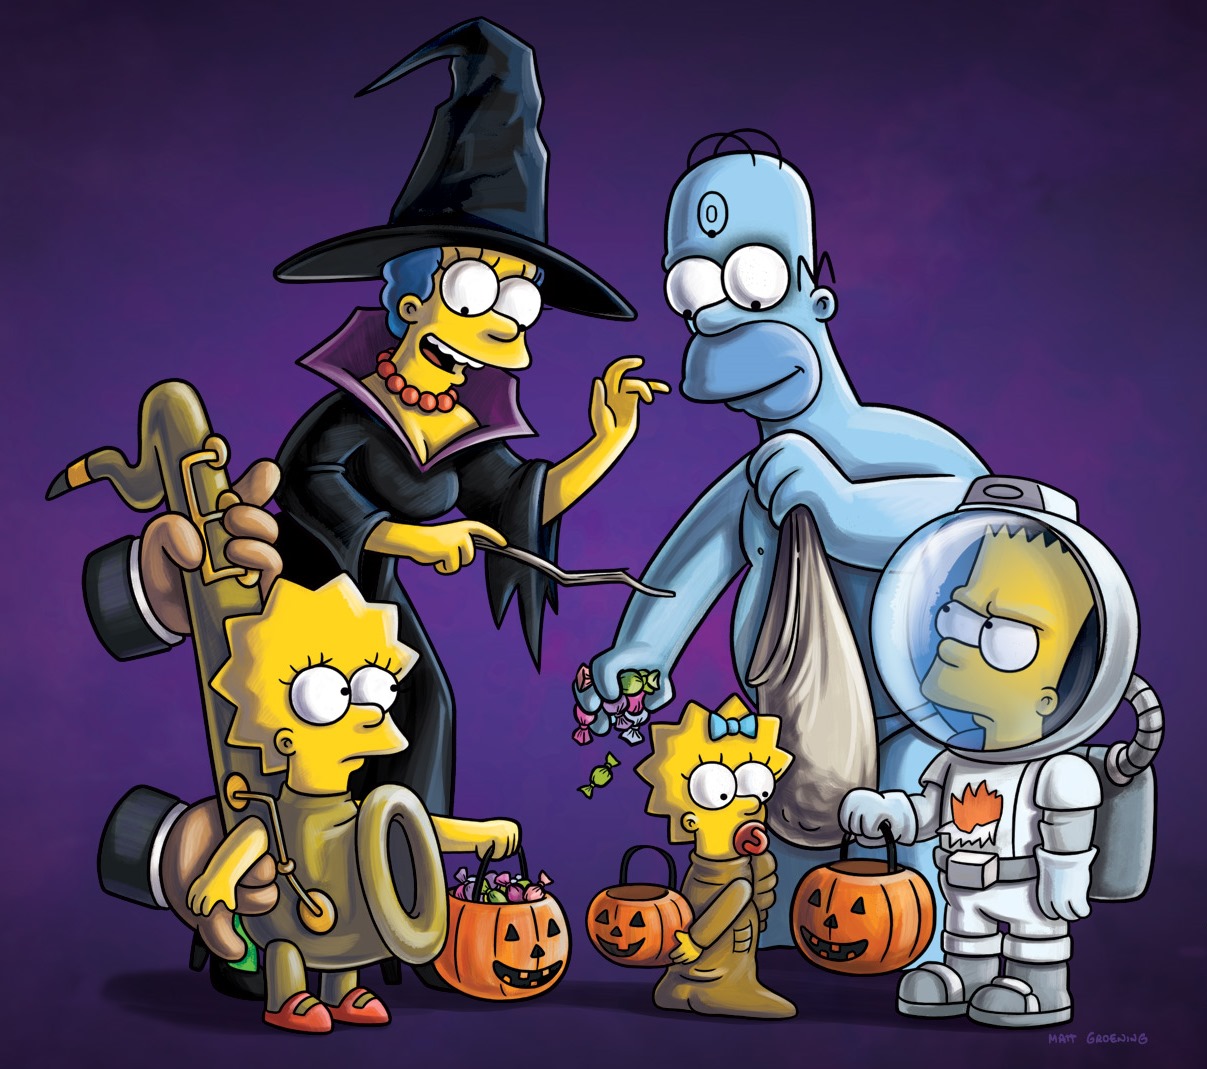 The Simpsons Treehouse of Horror Awake at Midnight